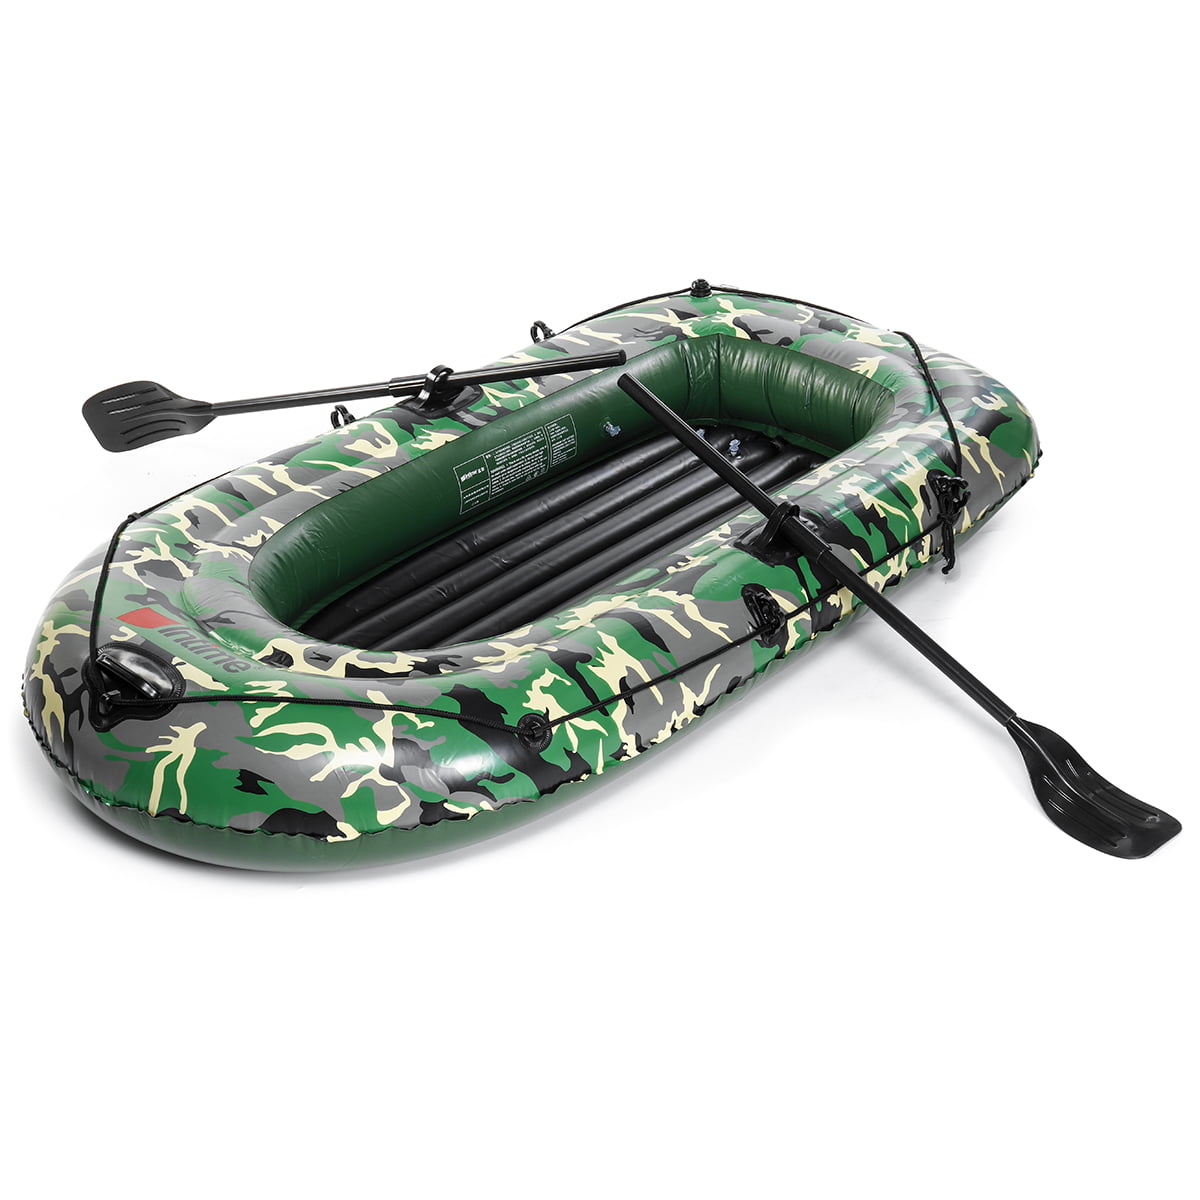 Adult Kids PVC Inflatable Boat Summer Garden Swimming Pool Beach Dinghy w/Paddle 